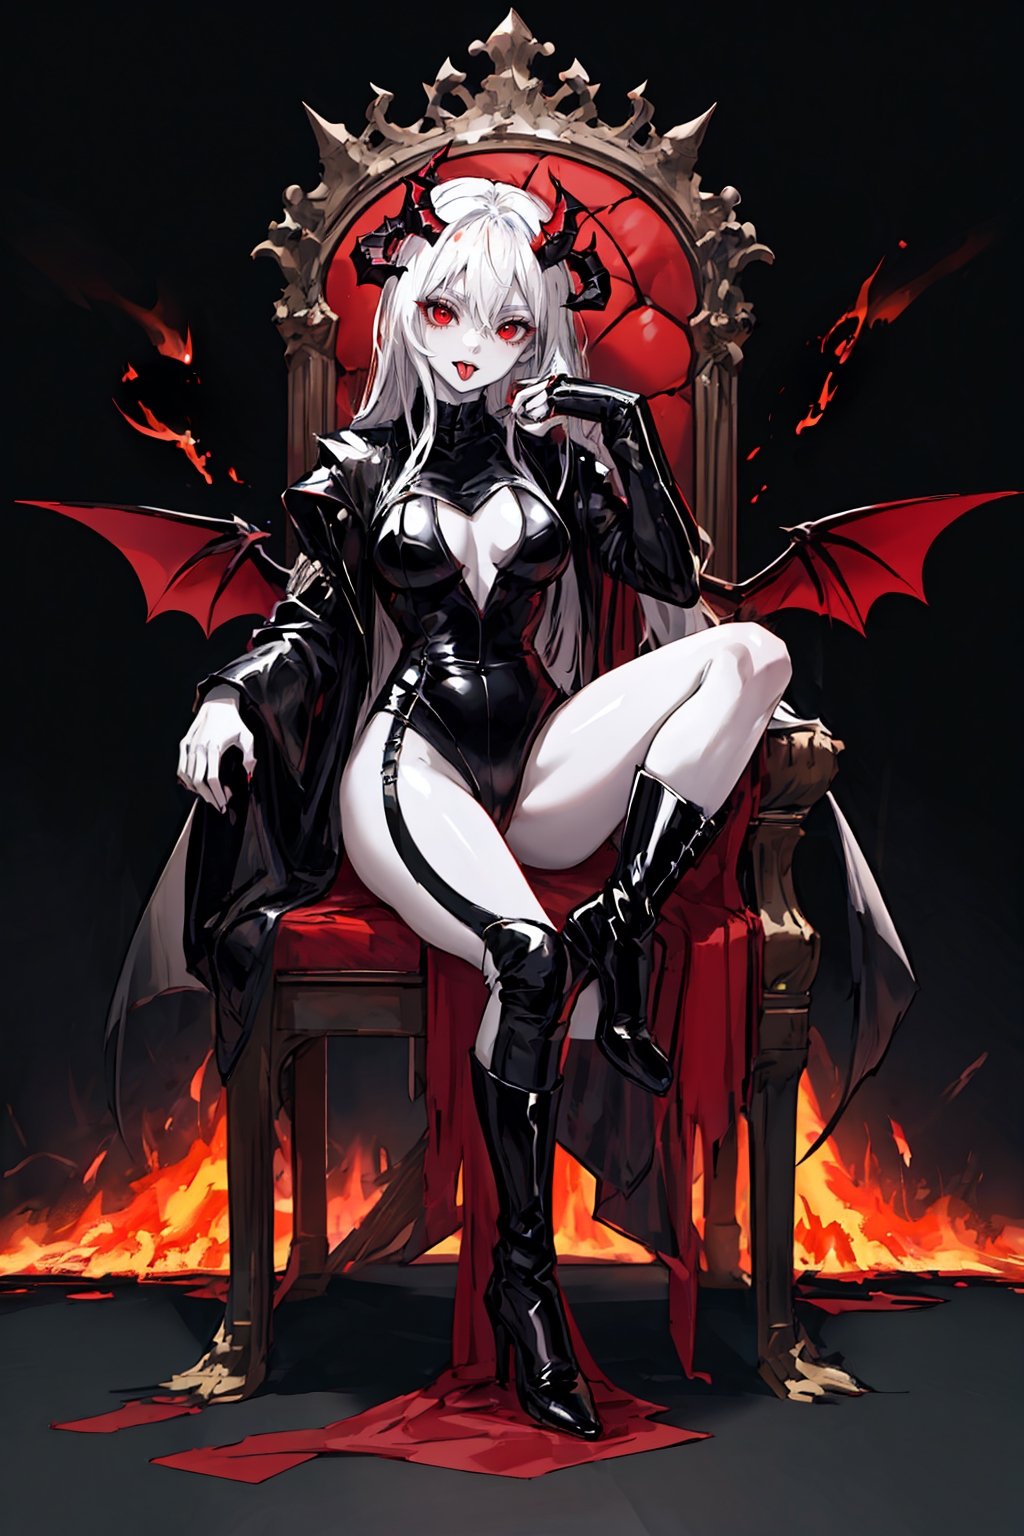 A succubus, expressive face, intense and red eyes, white and pale skin, with its tongue out, horns on its head, wearing a skin-tight outfit closed to the body, background in flames, fire, hell, bat wings on his back, full_body, wearing black leather boots with high heels, sitting on a black iron throne.